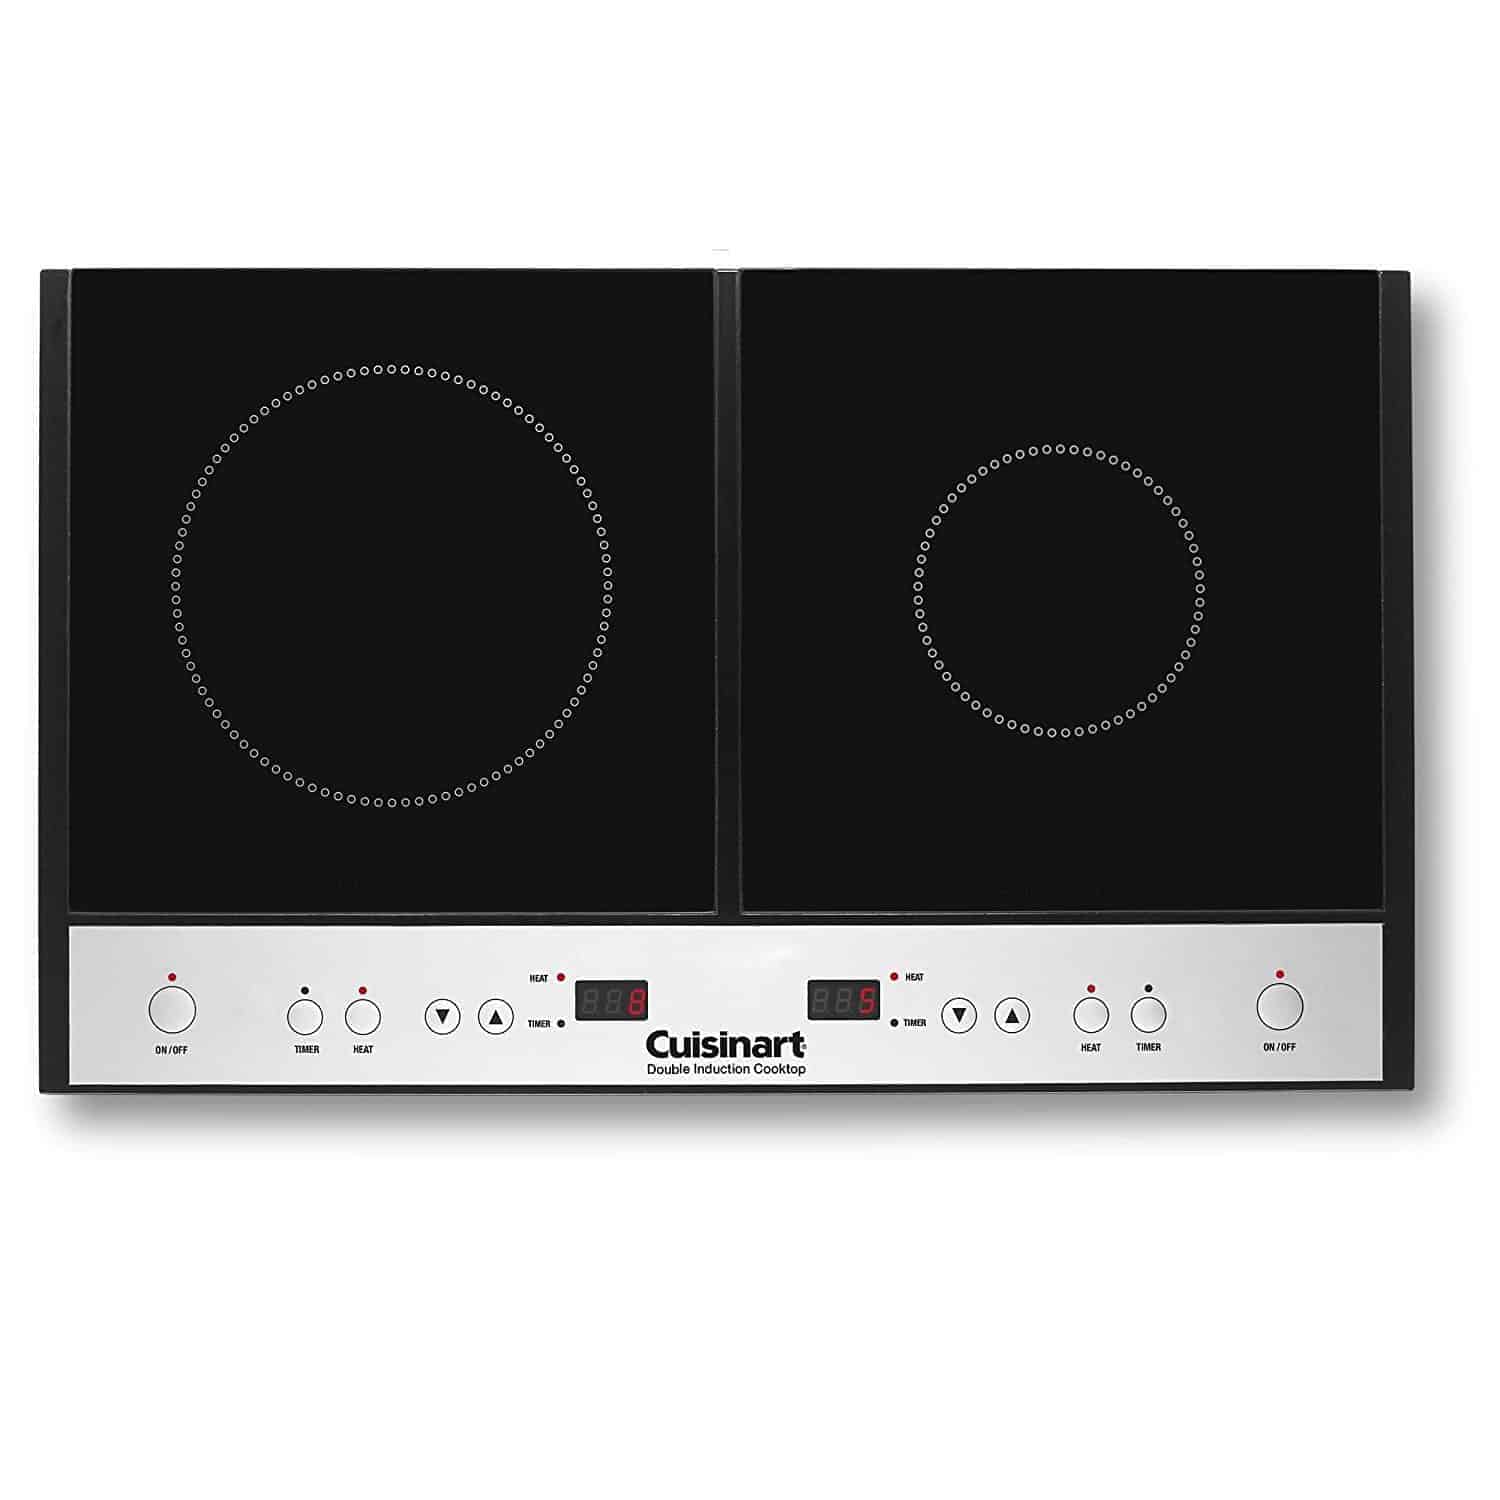 Best induction cooktop with 2 burners: Cuisinart ICT 60